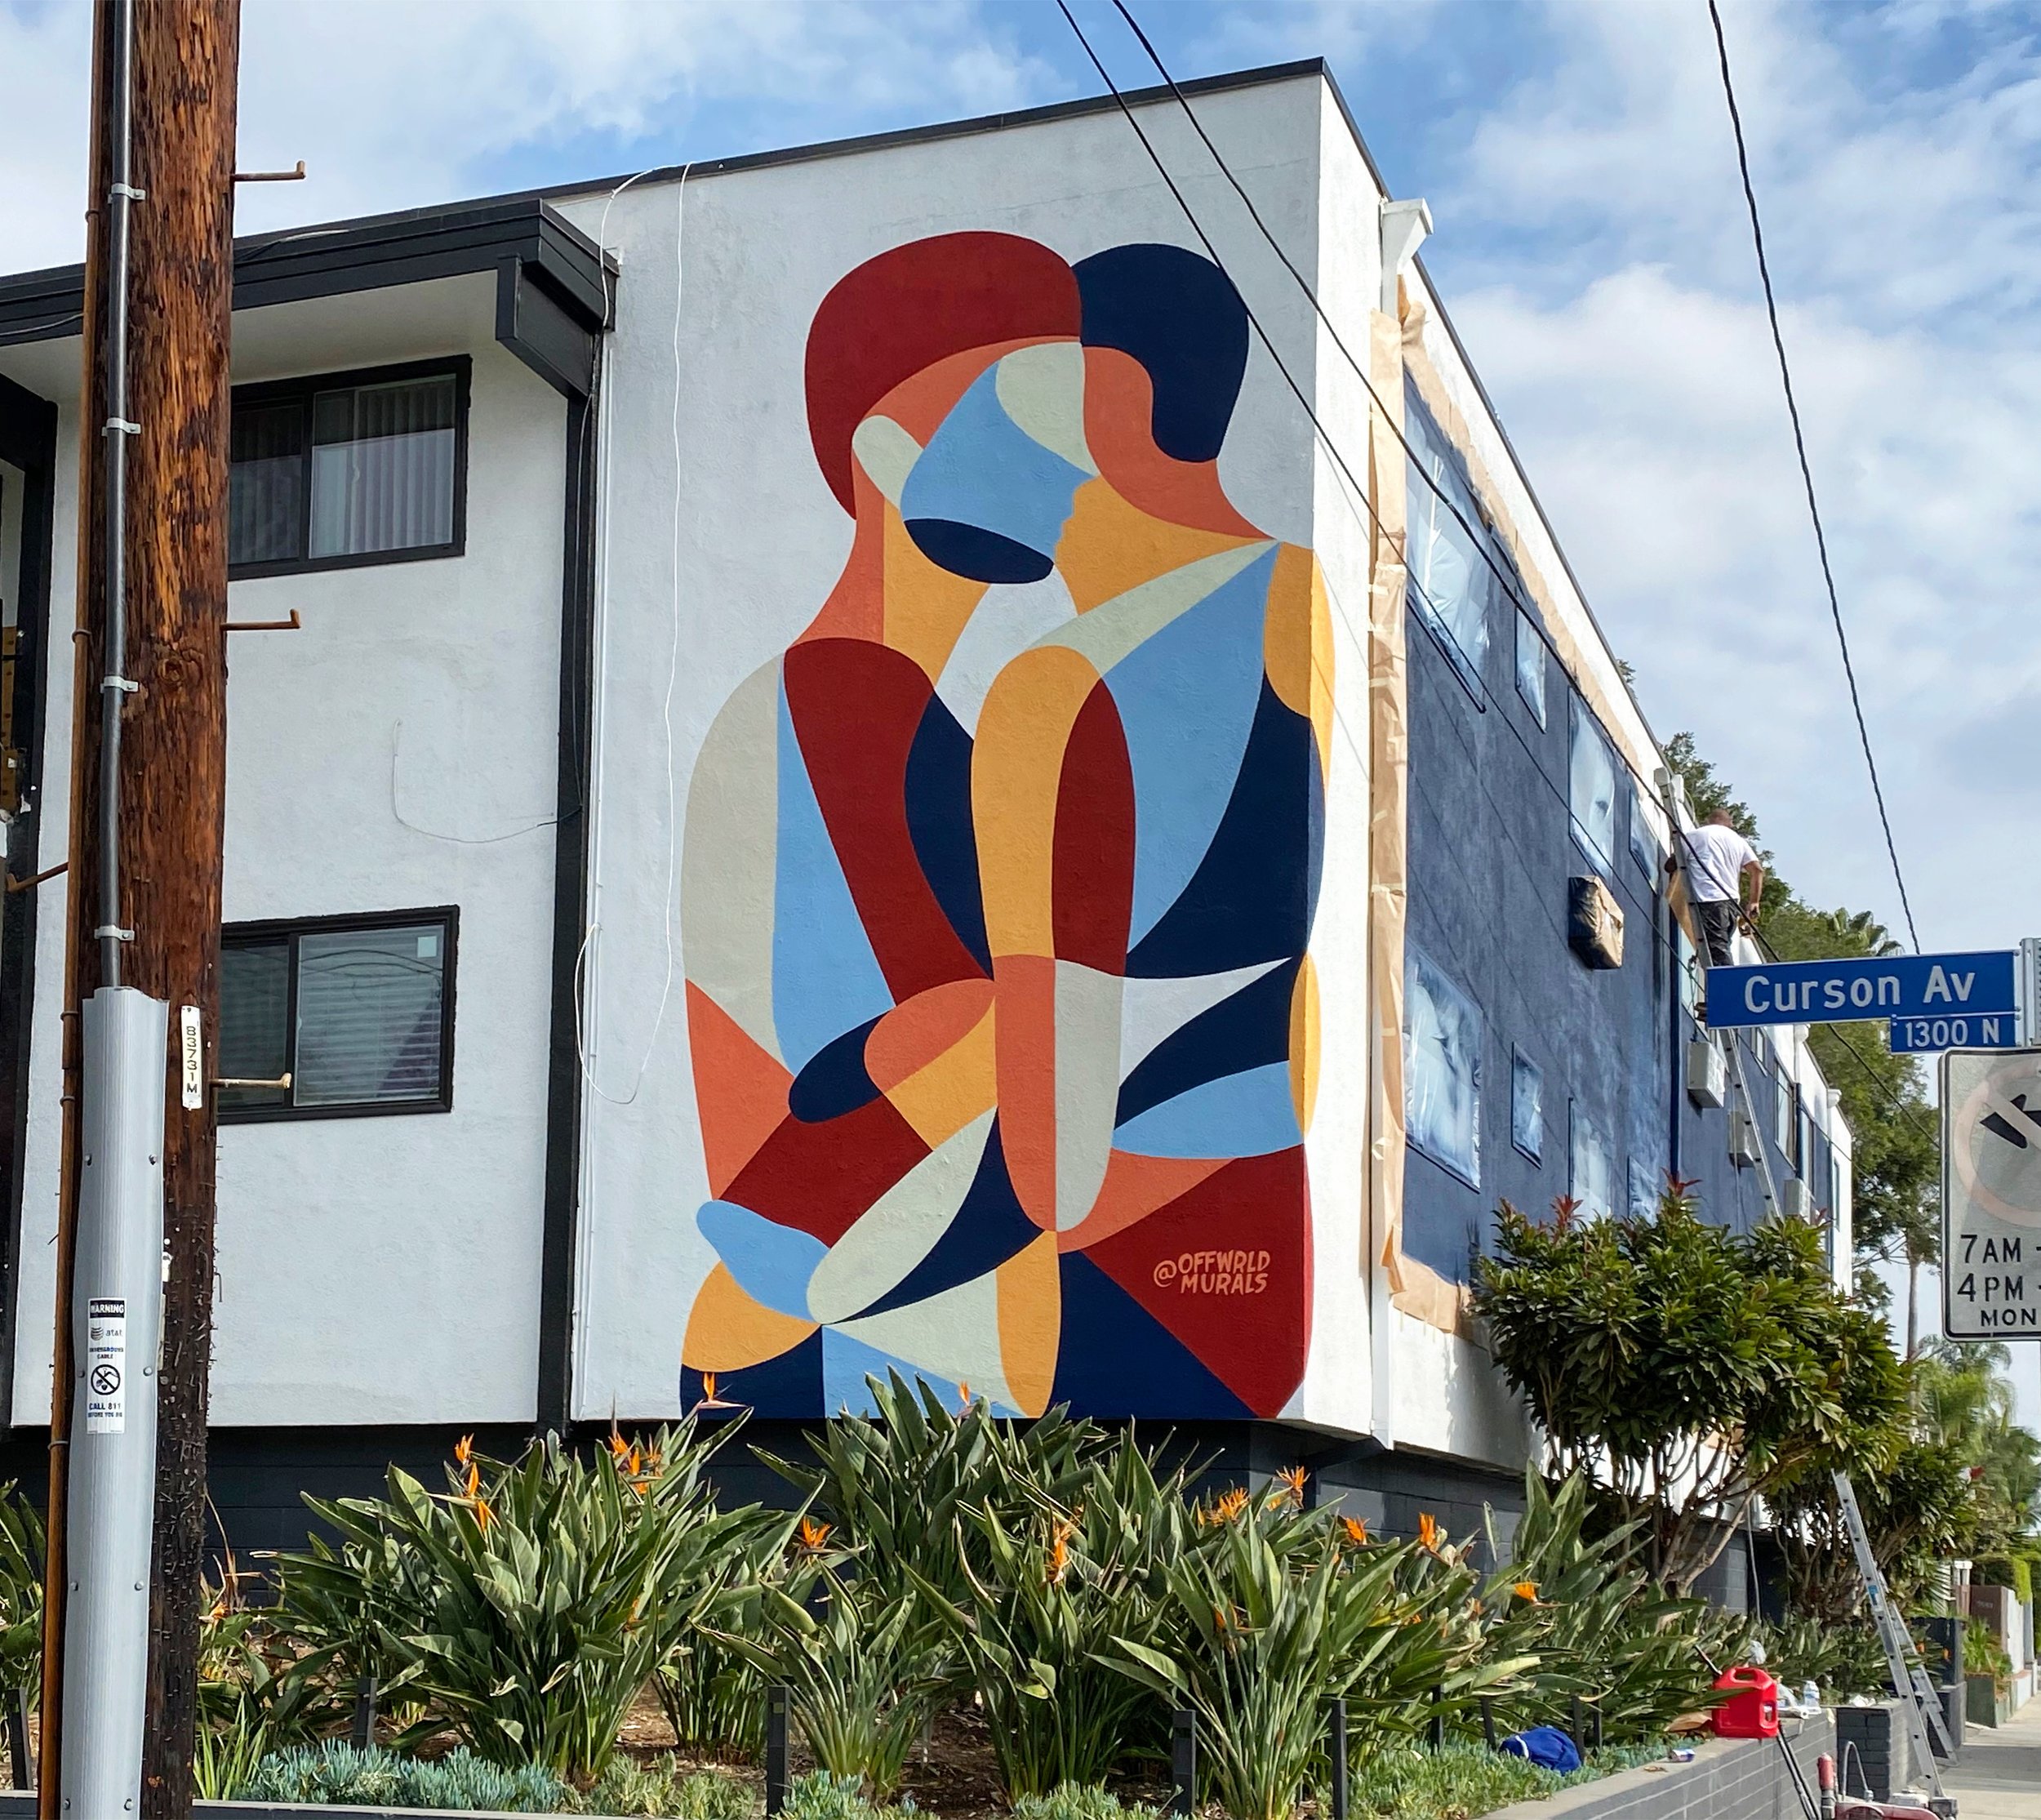  This mural features 2 abstract figures embracing. It was designed to celebrate the LGBTQ+ community of West Hollywood.  Coco Nella Collab with Offwrld Murals - Designed by Corinne Pulsinelle.   Location: West Hollywood, Los Angeles, CA. 